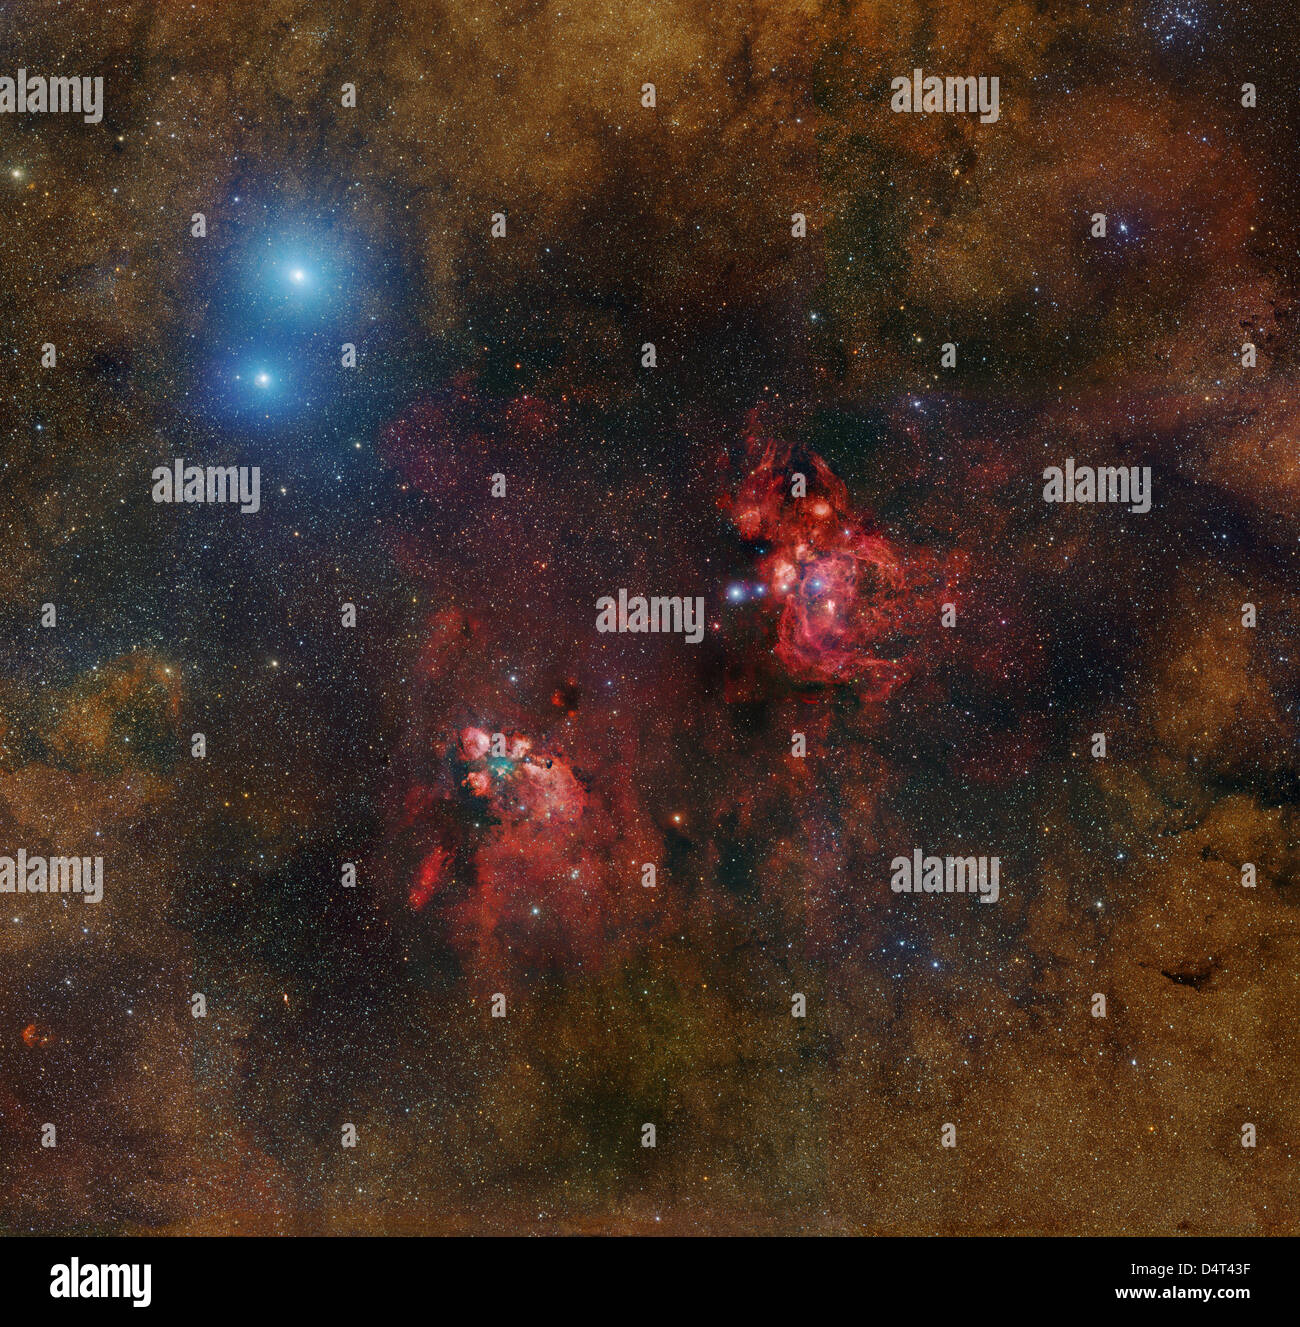 NGC 6334 and NGC 6357, The Cat's Paw and Lobster Nebulae in Scorpius. Stock Photo